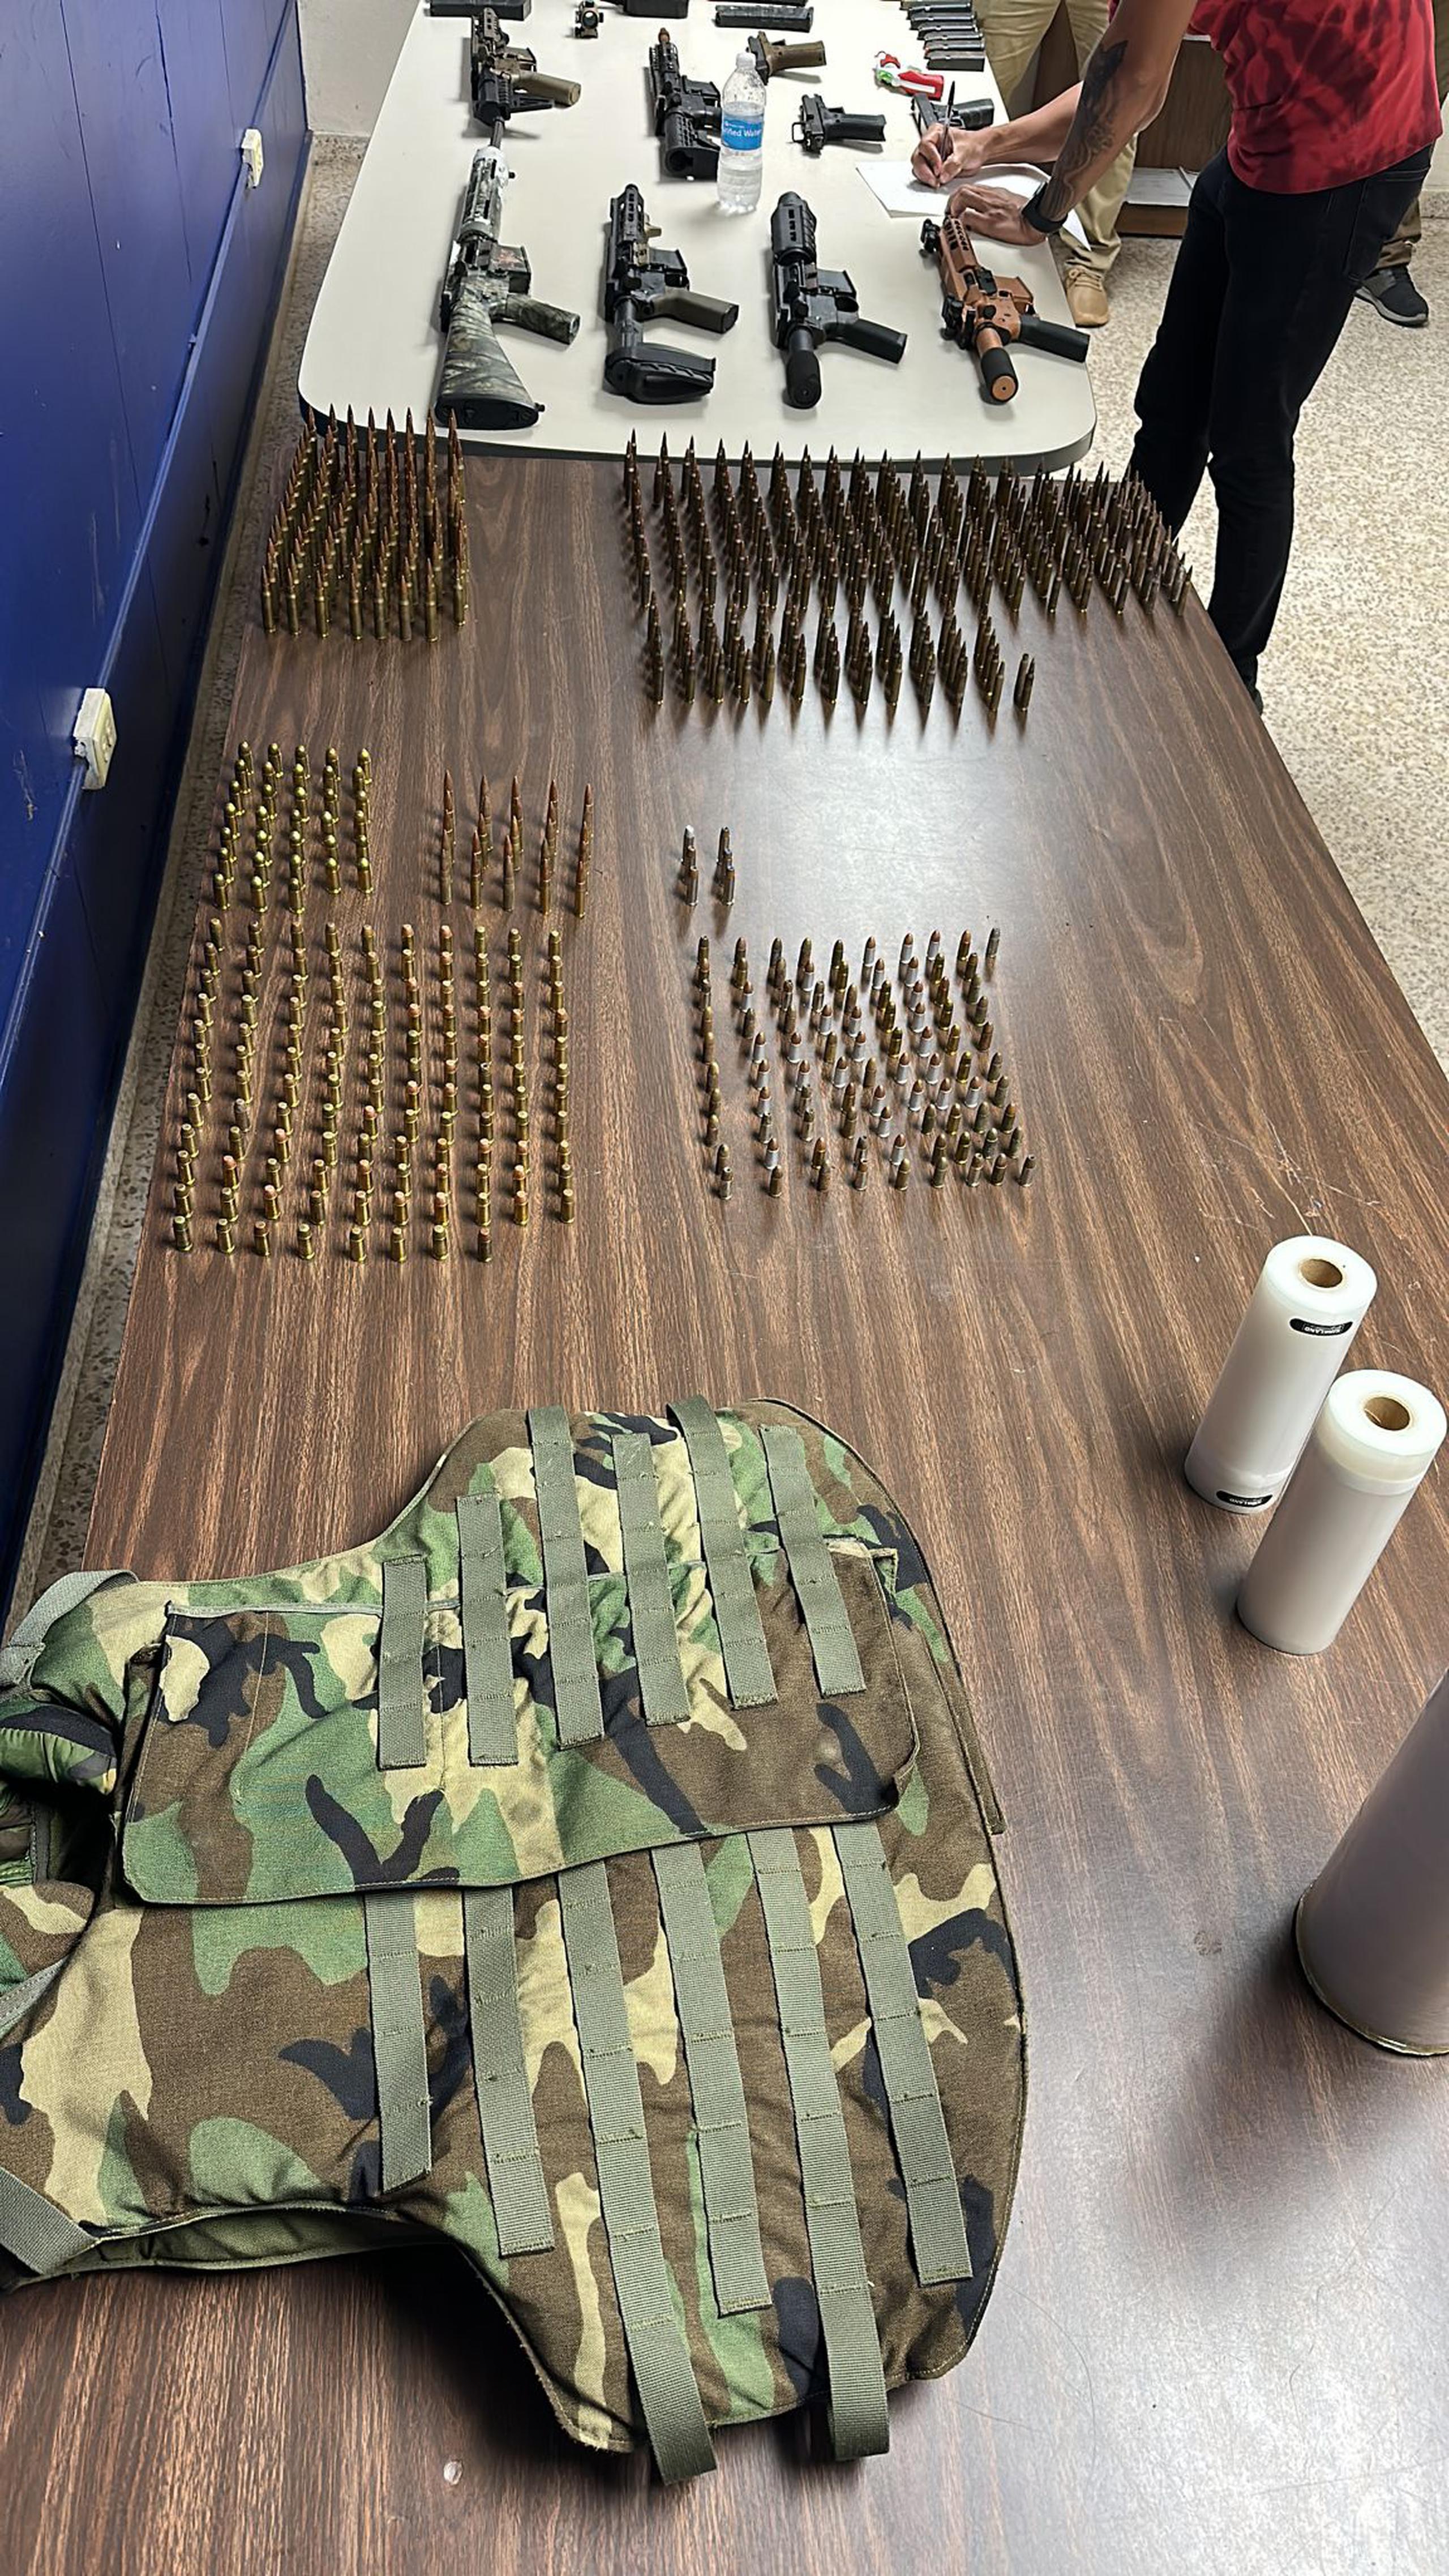 Bulletproof vests, dozens of magazines and hundreds of mini-munitions were stored in an arms warehouse in Barrio Obrero, Santurce.